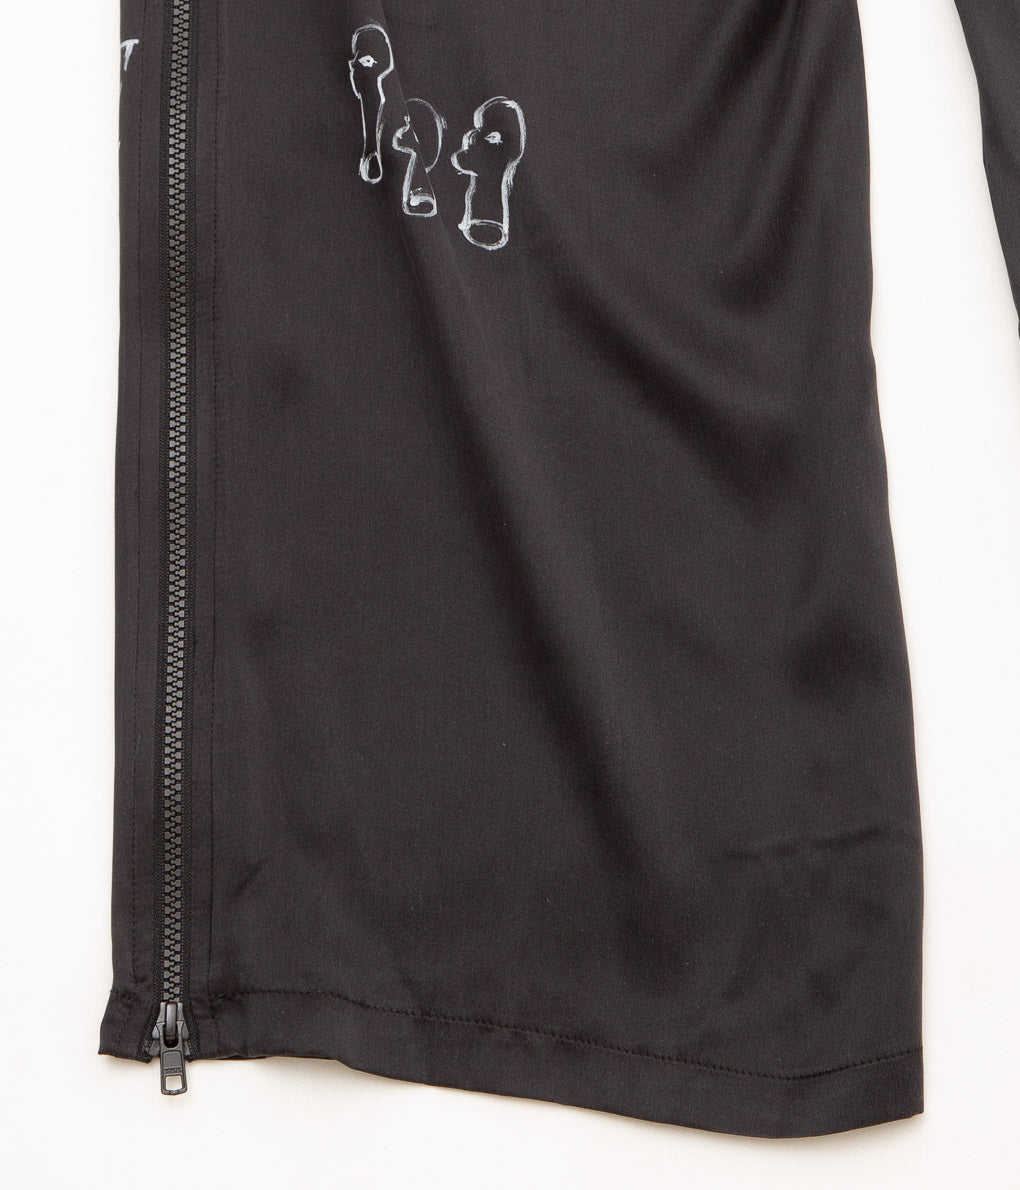 WONDEROUND "HAND PAINTED BOXING TROUSERS "(BLACK)